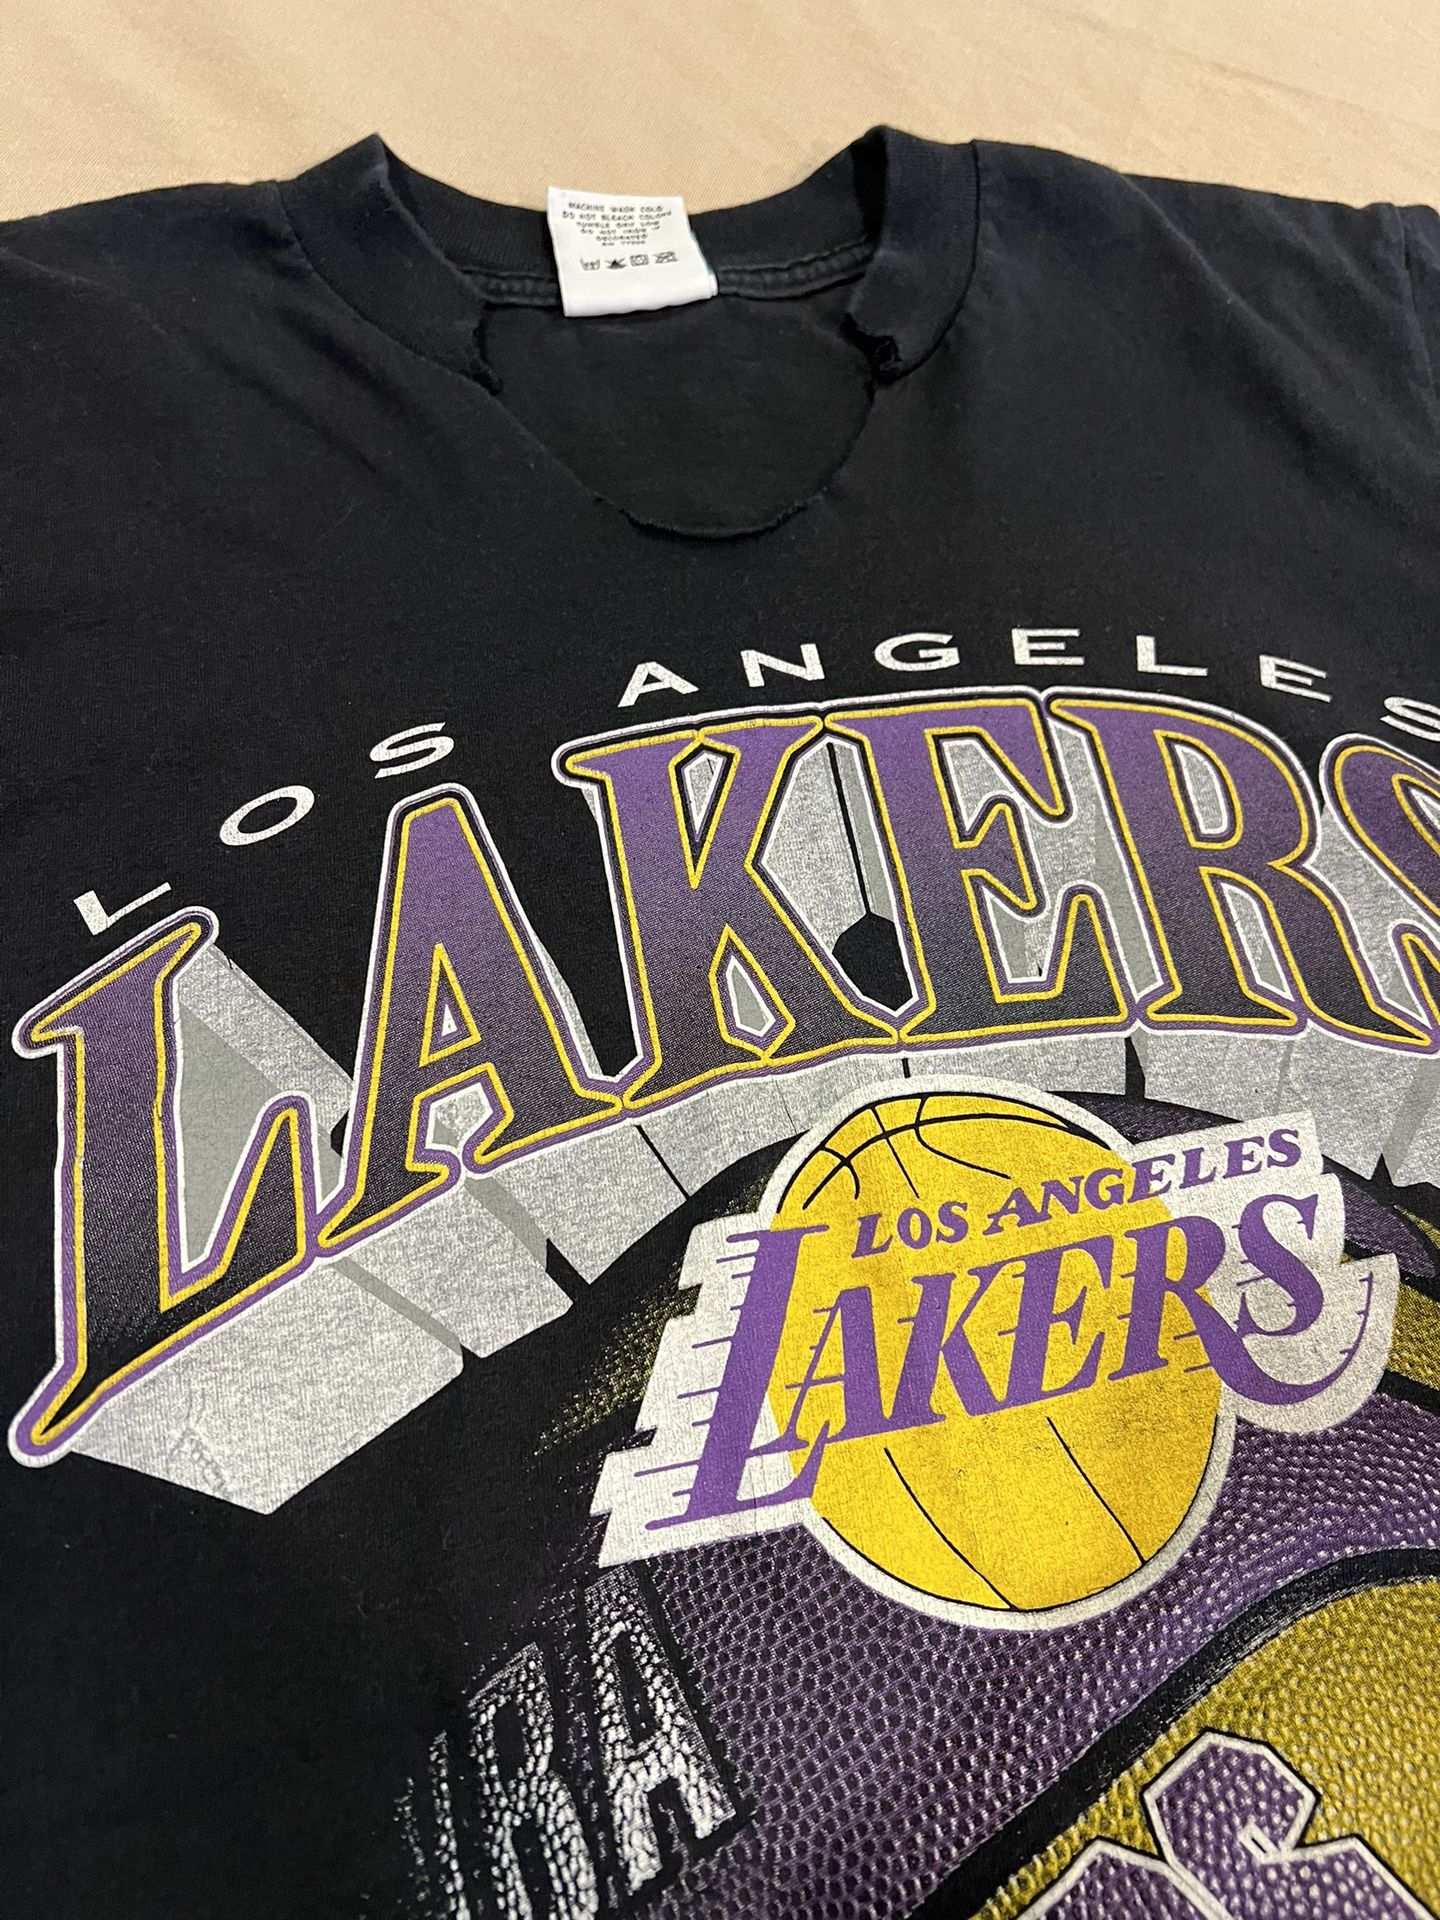 Vintage LA Los Angeles Lakers Dynasty Basketball T Shirt Tee for Sale in  Anaheim, CA - OfferUp